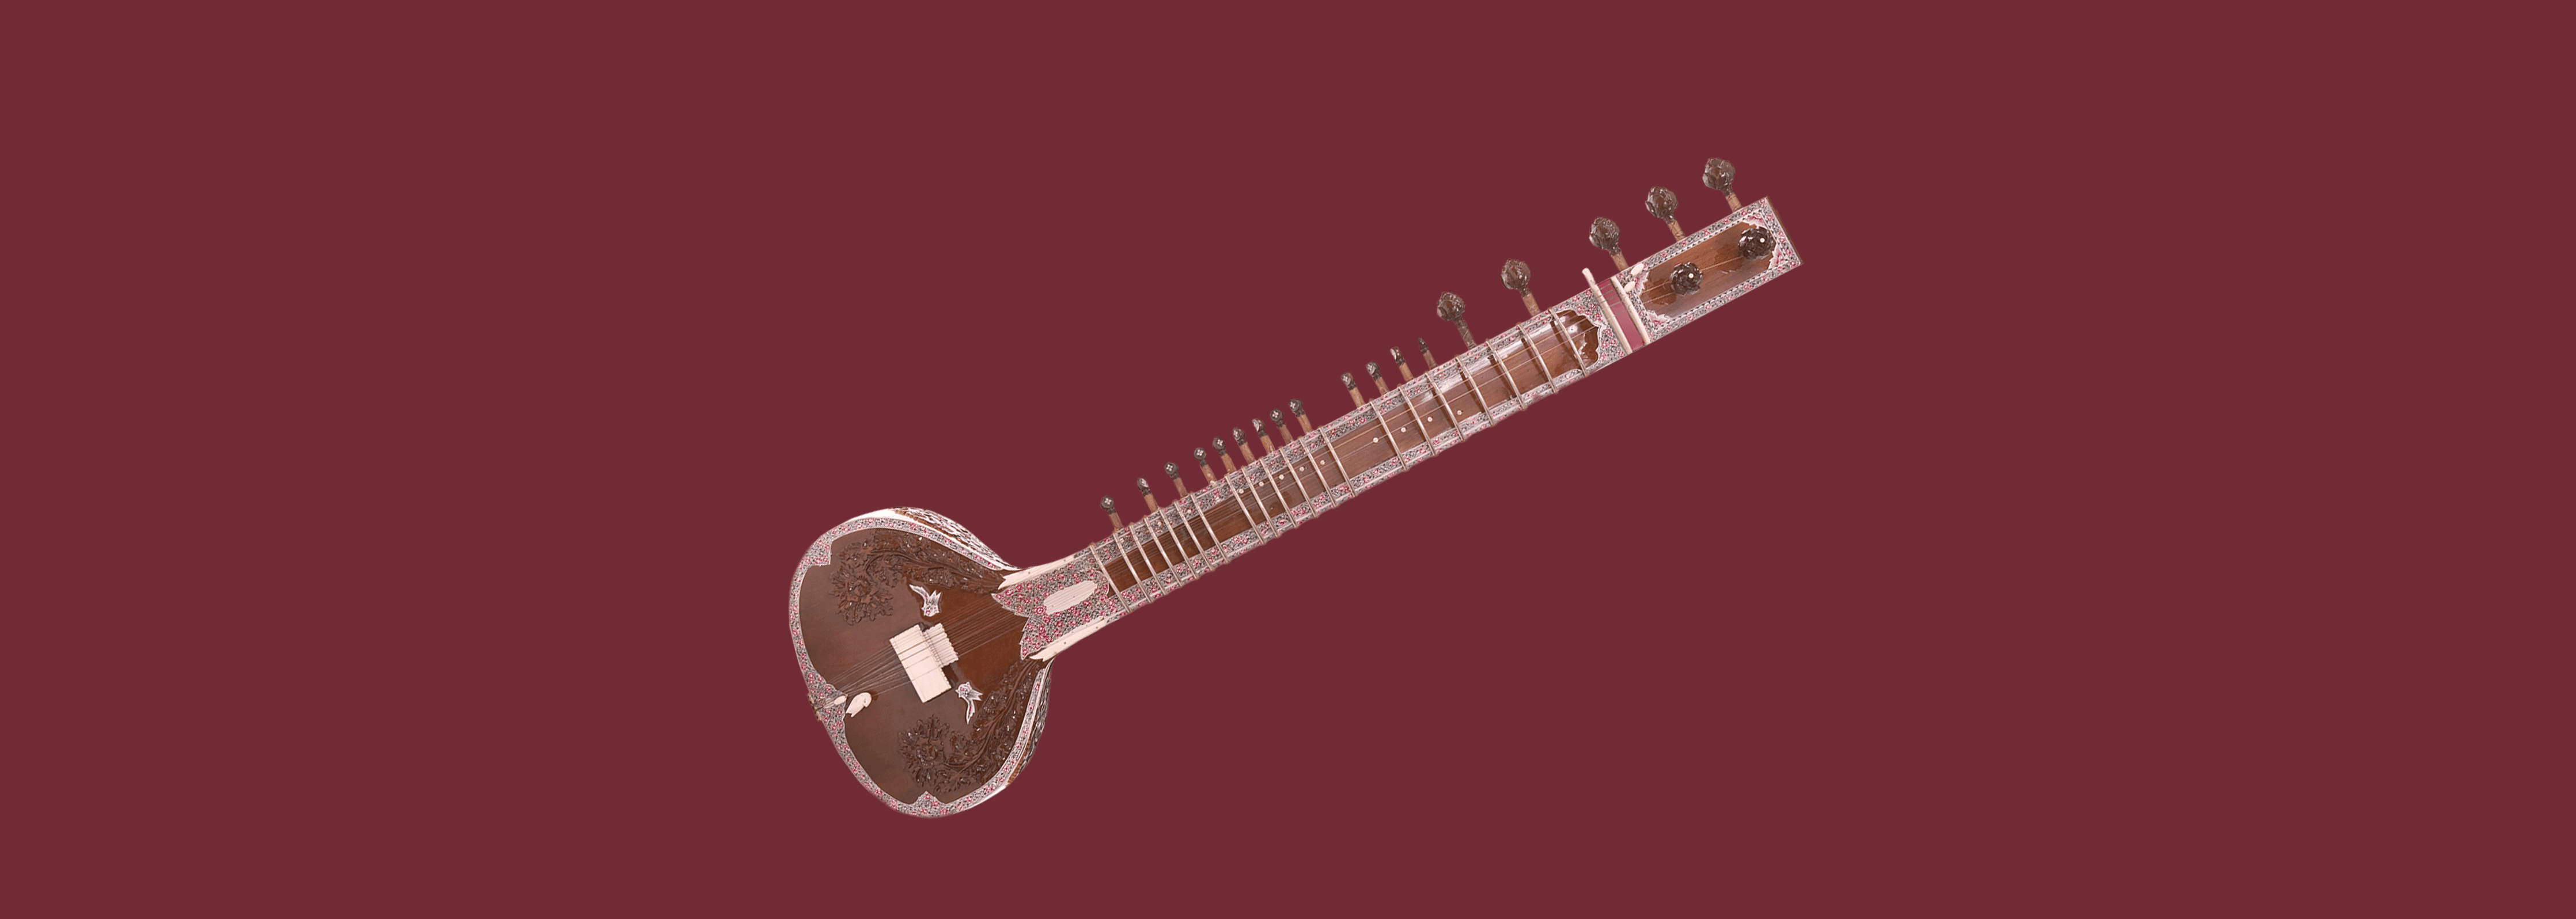 The Sitar is Available Now